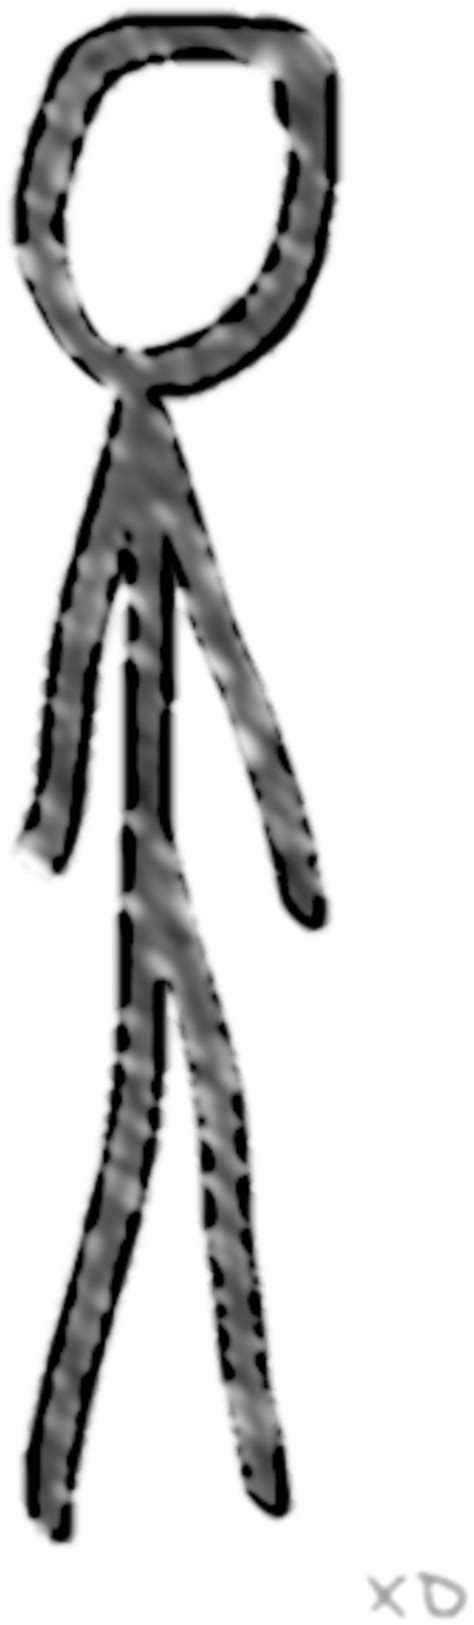 Download Stick Person By Saprogeist On Clipart Library Openclipart